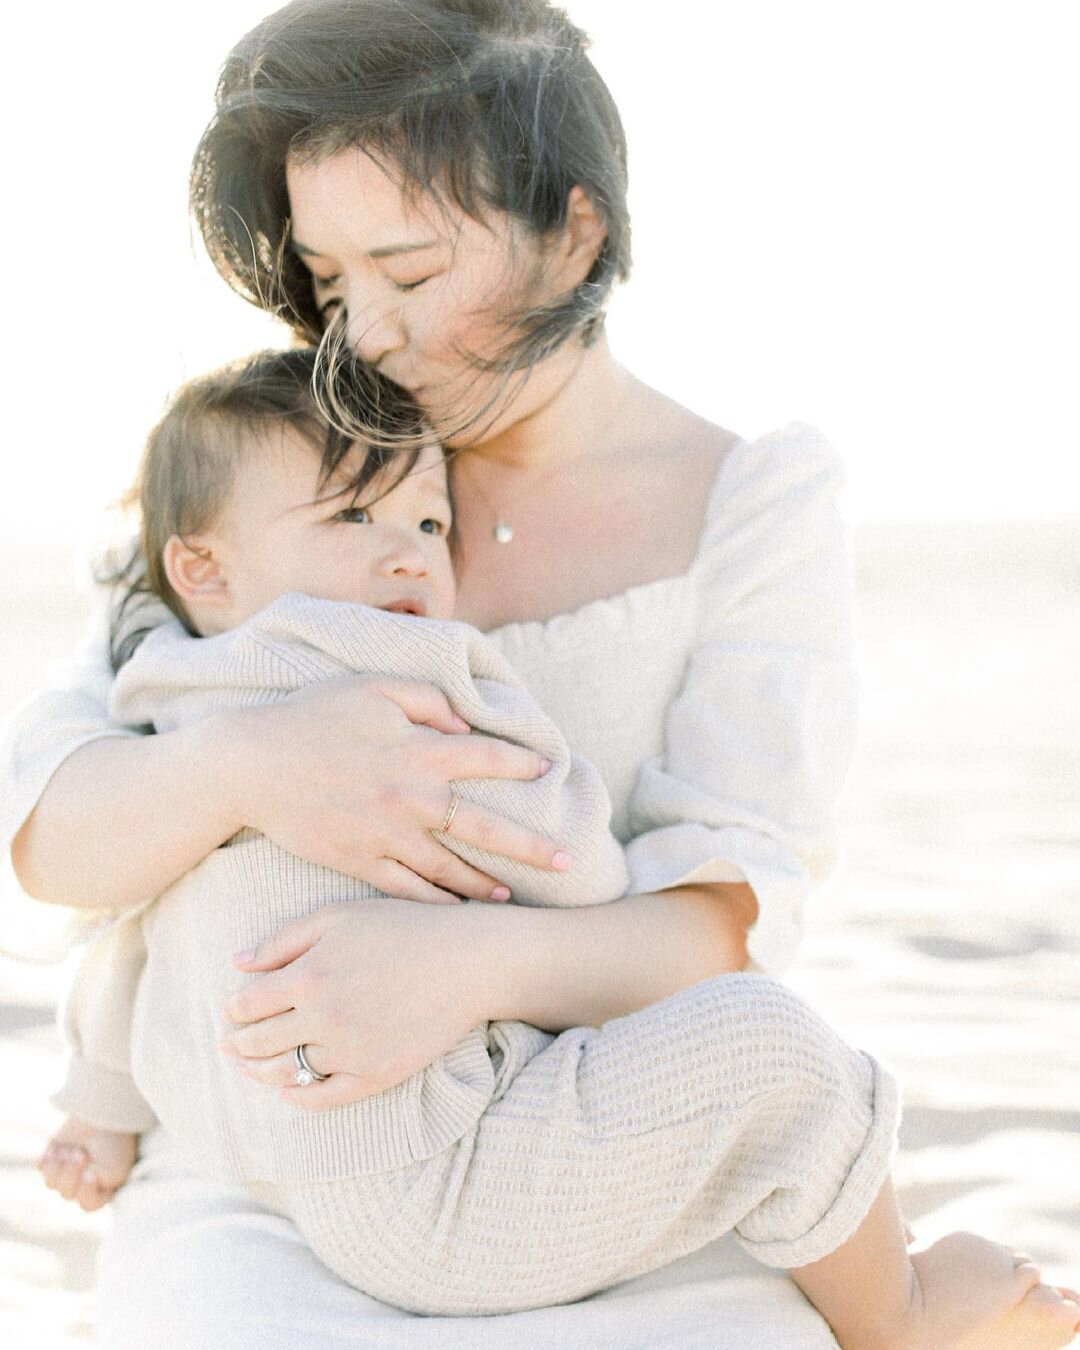 All the backlight magic bringing our attention to the sweetest of cuddles between mother and son.⠀⠀⠀⠀⠀⠀⠀⠀⠀
⠀⠀⠀⠀⠀⠀⠀⠀⠀
Image by: @coriklecknerphotography⠀⠀⠀⠀⠀⠀⠀⠀⠀
Image edited using Noble Signature Preset